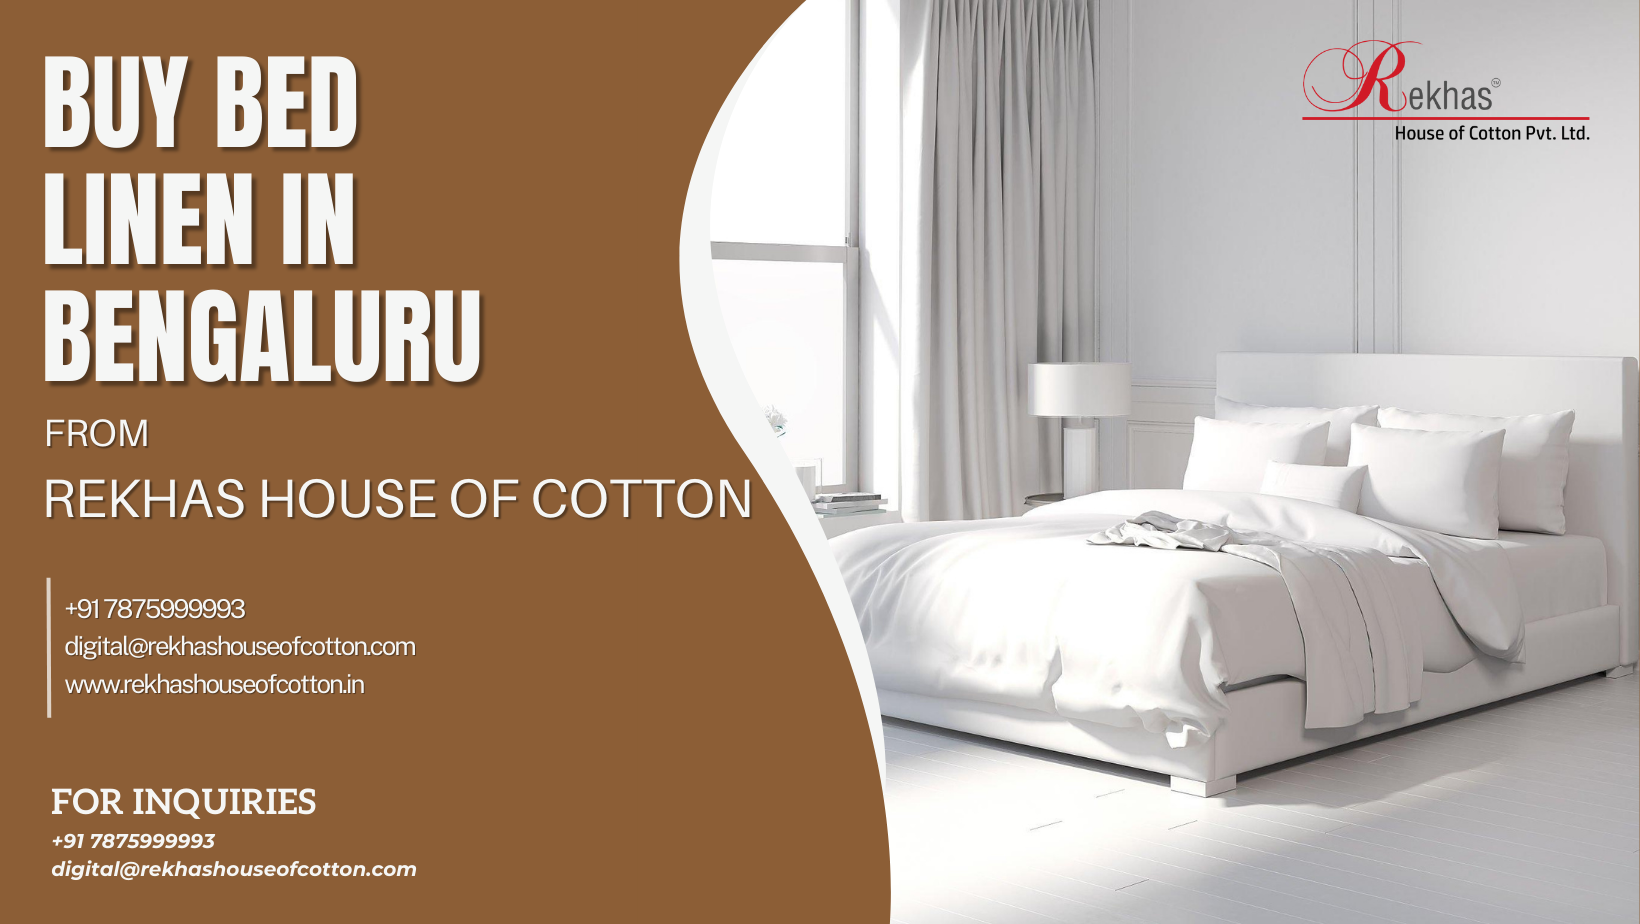 Buy Bed Linen in Bengaluru from Rekhas House of Cotton at cheap and affordable price